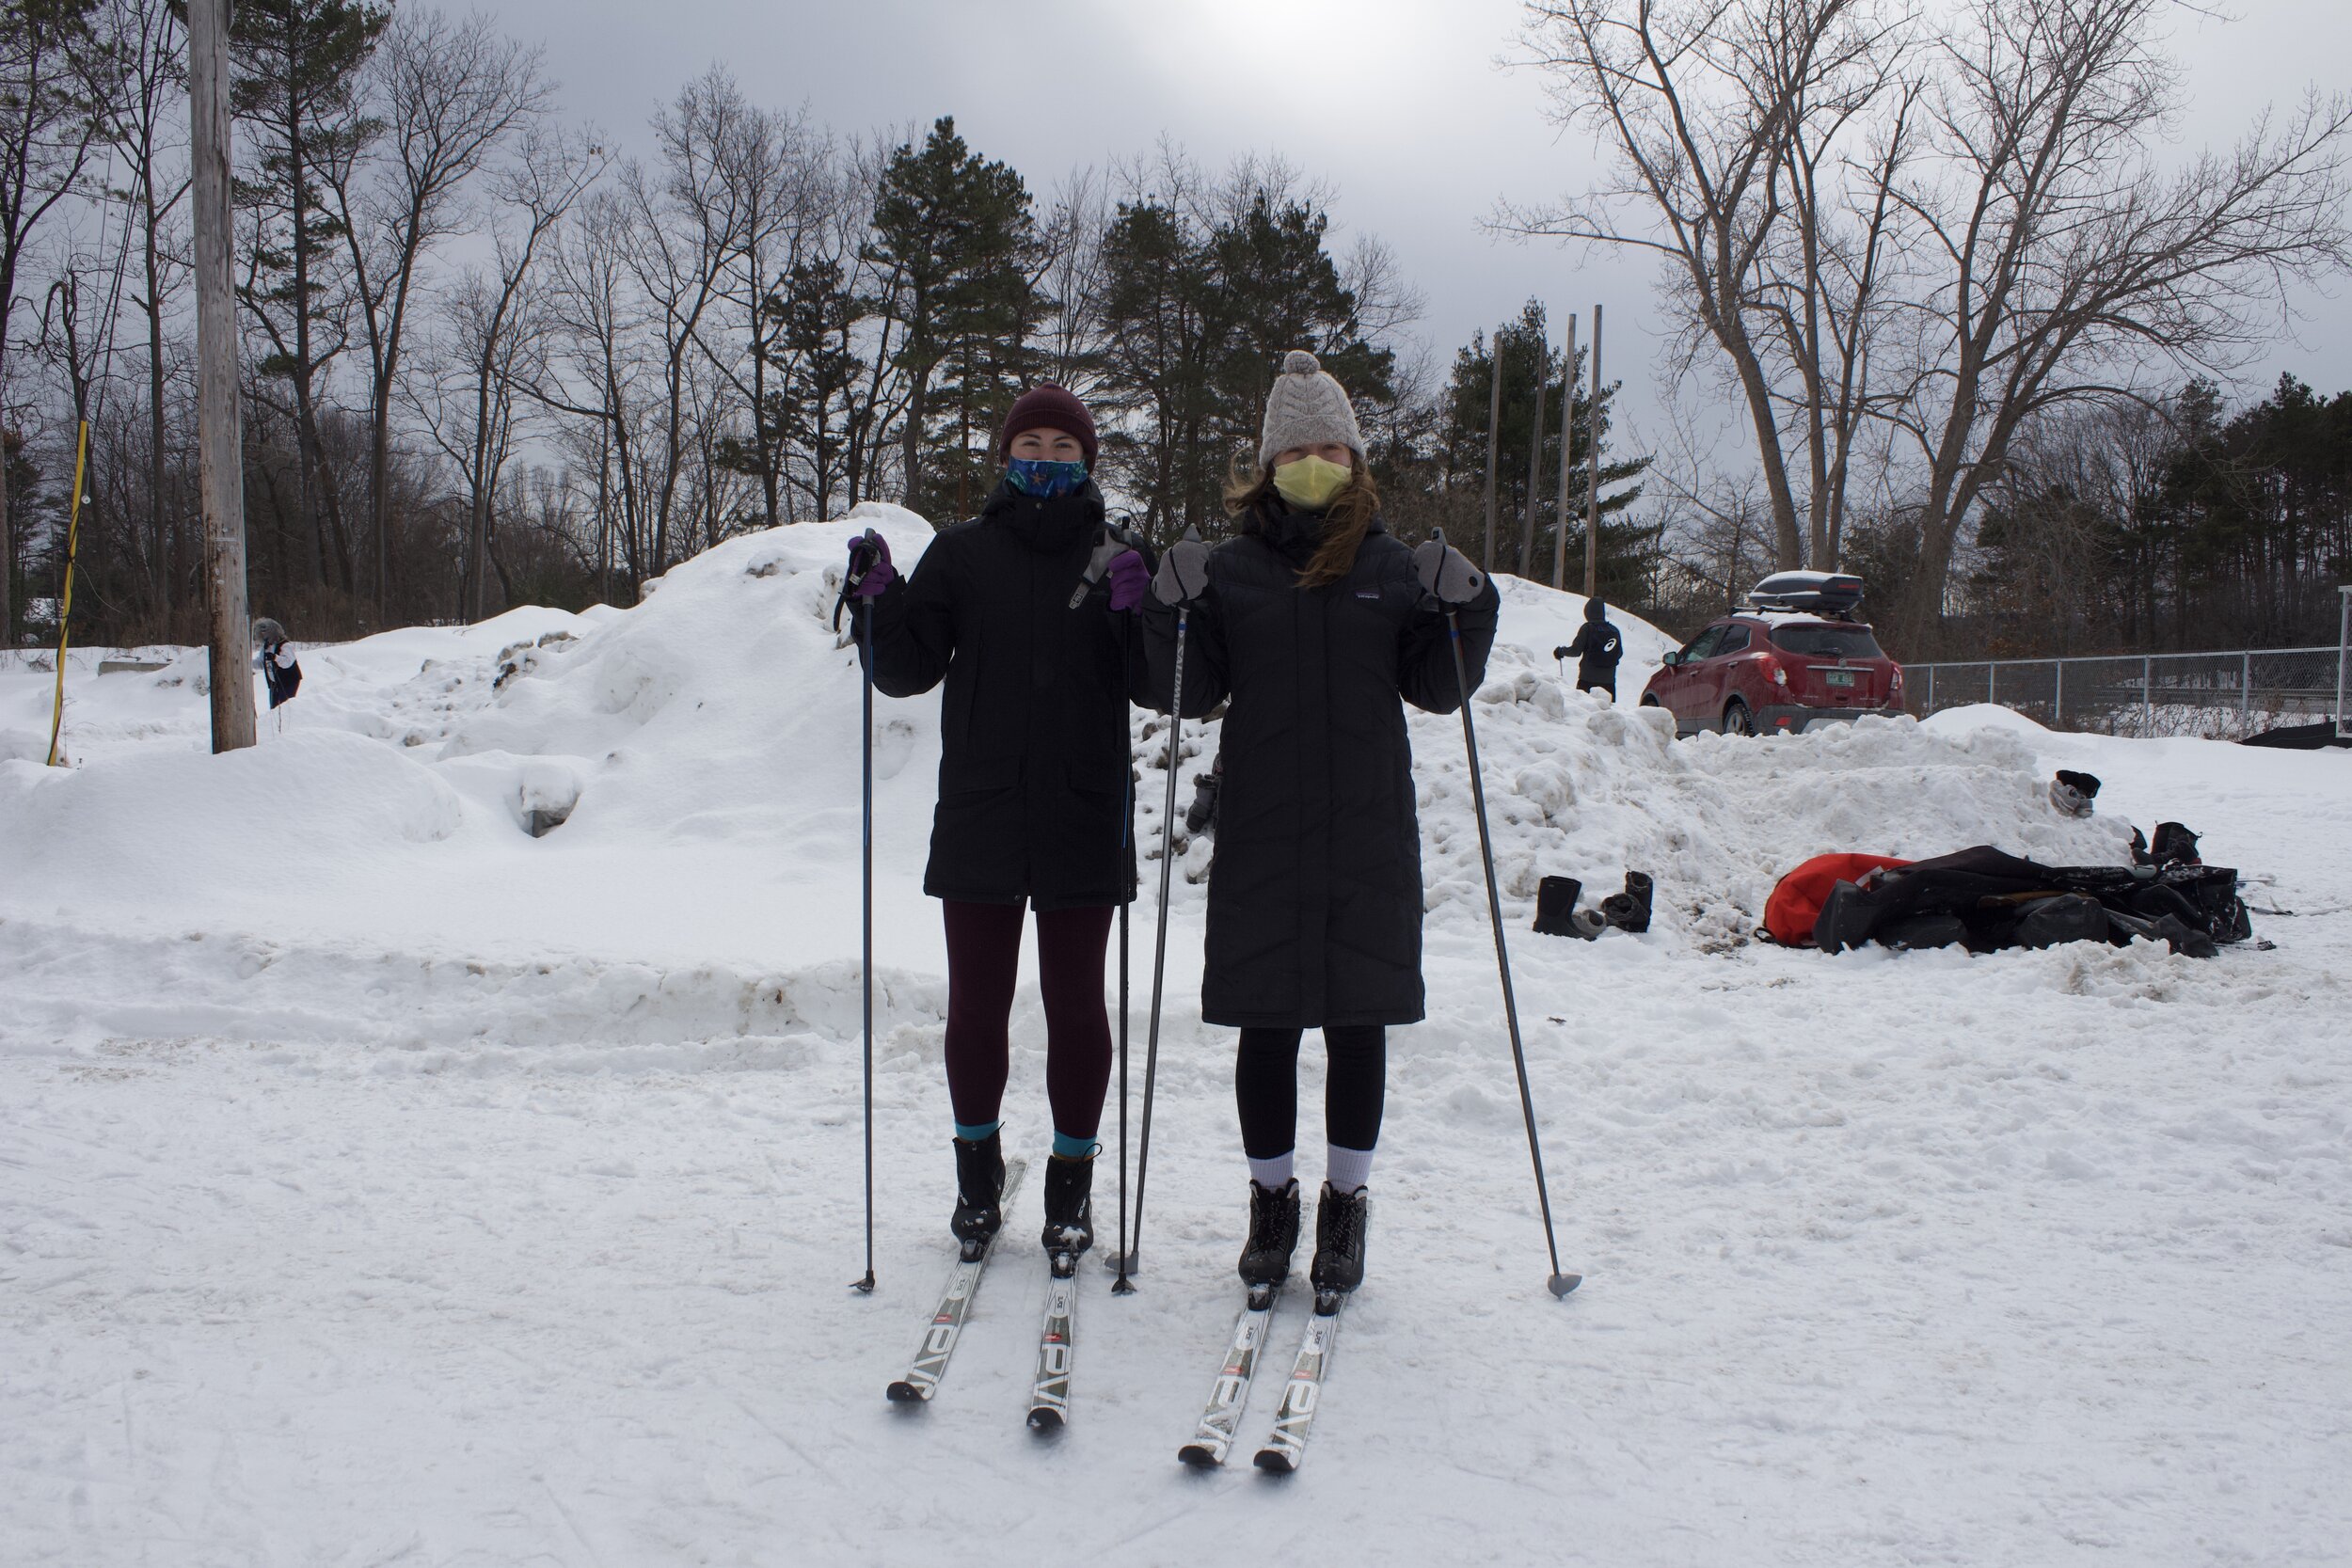   Becca and Jessie got their gear on and are ready to go down the hill.  